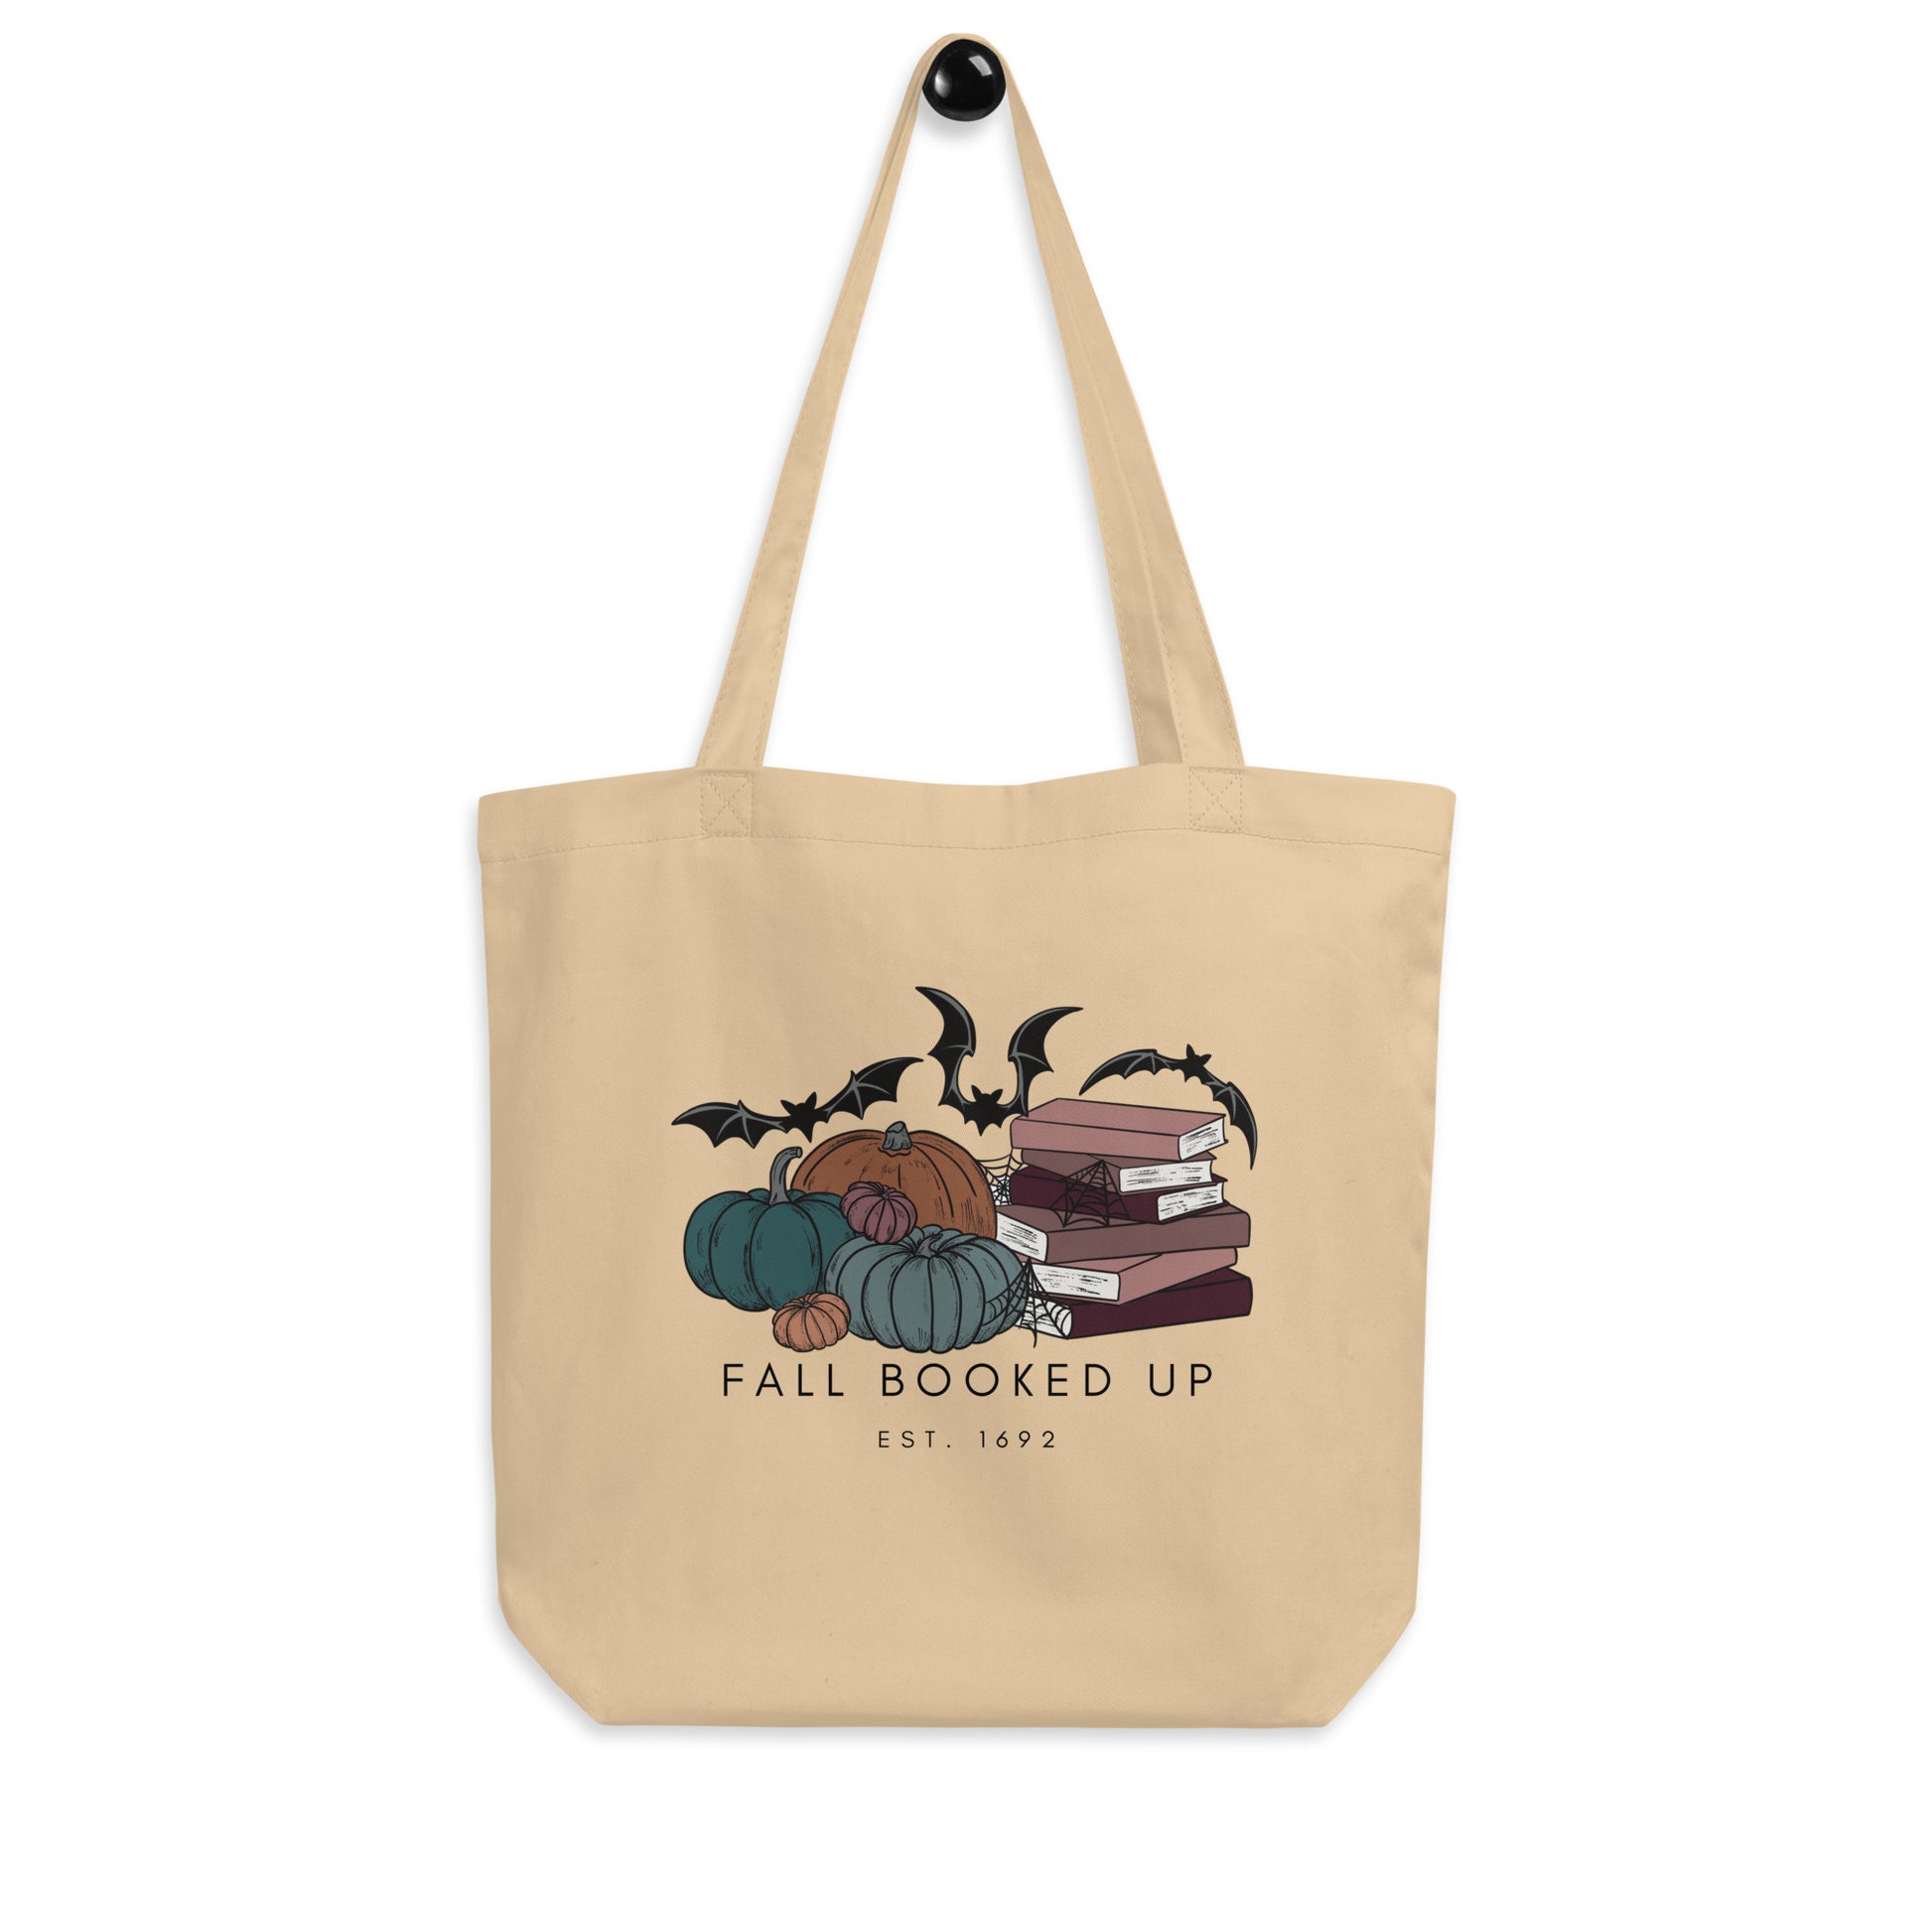 Fall Booked Up Eco Tote Bag for FireDrake Artistry